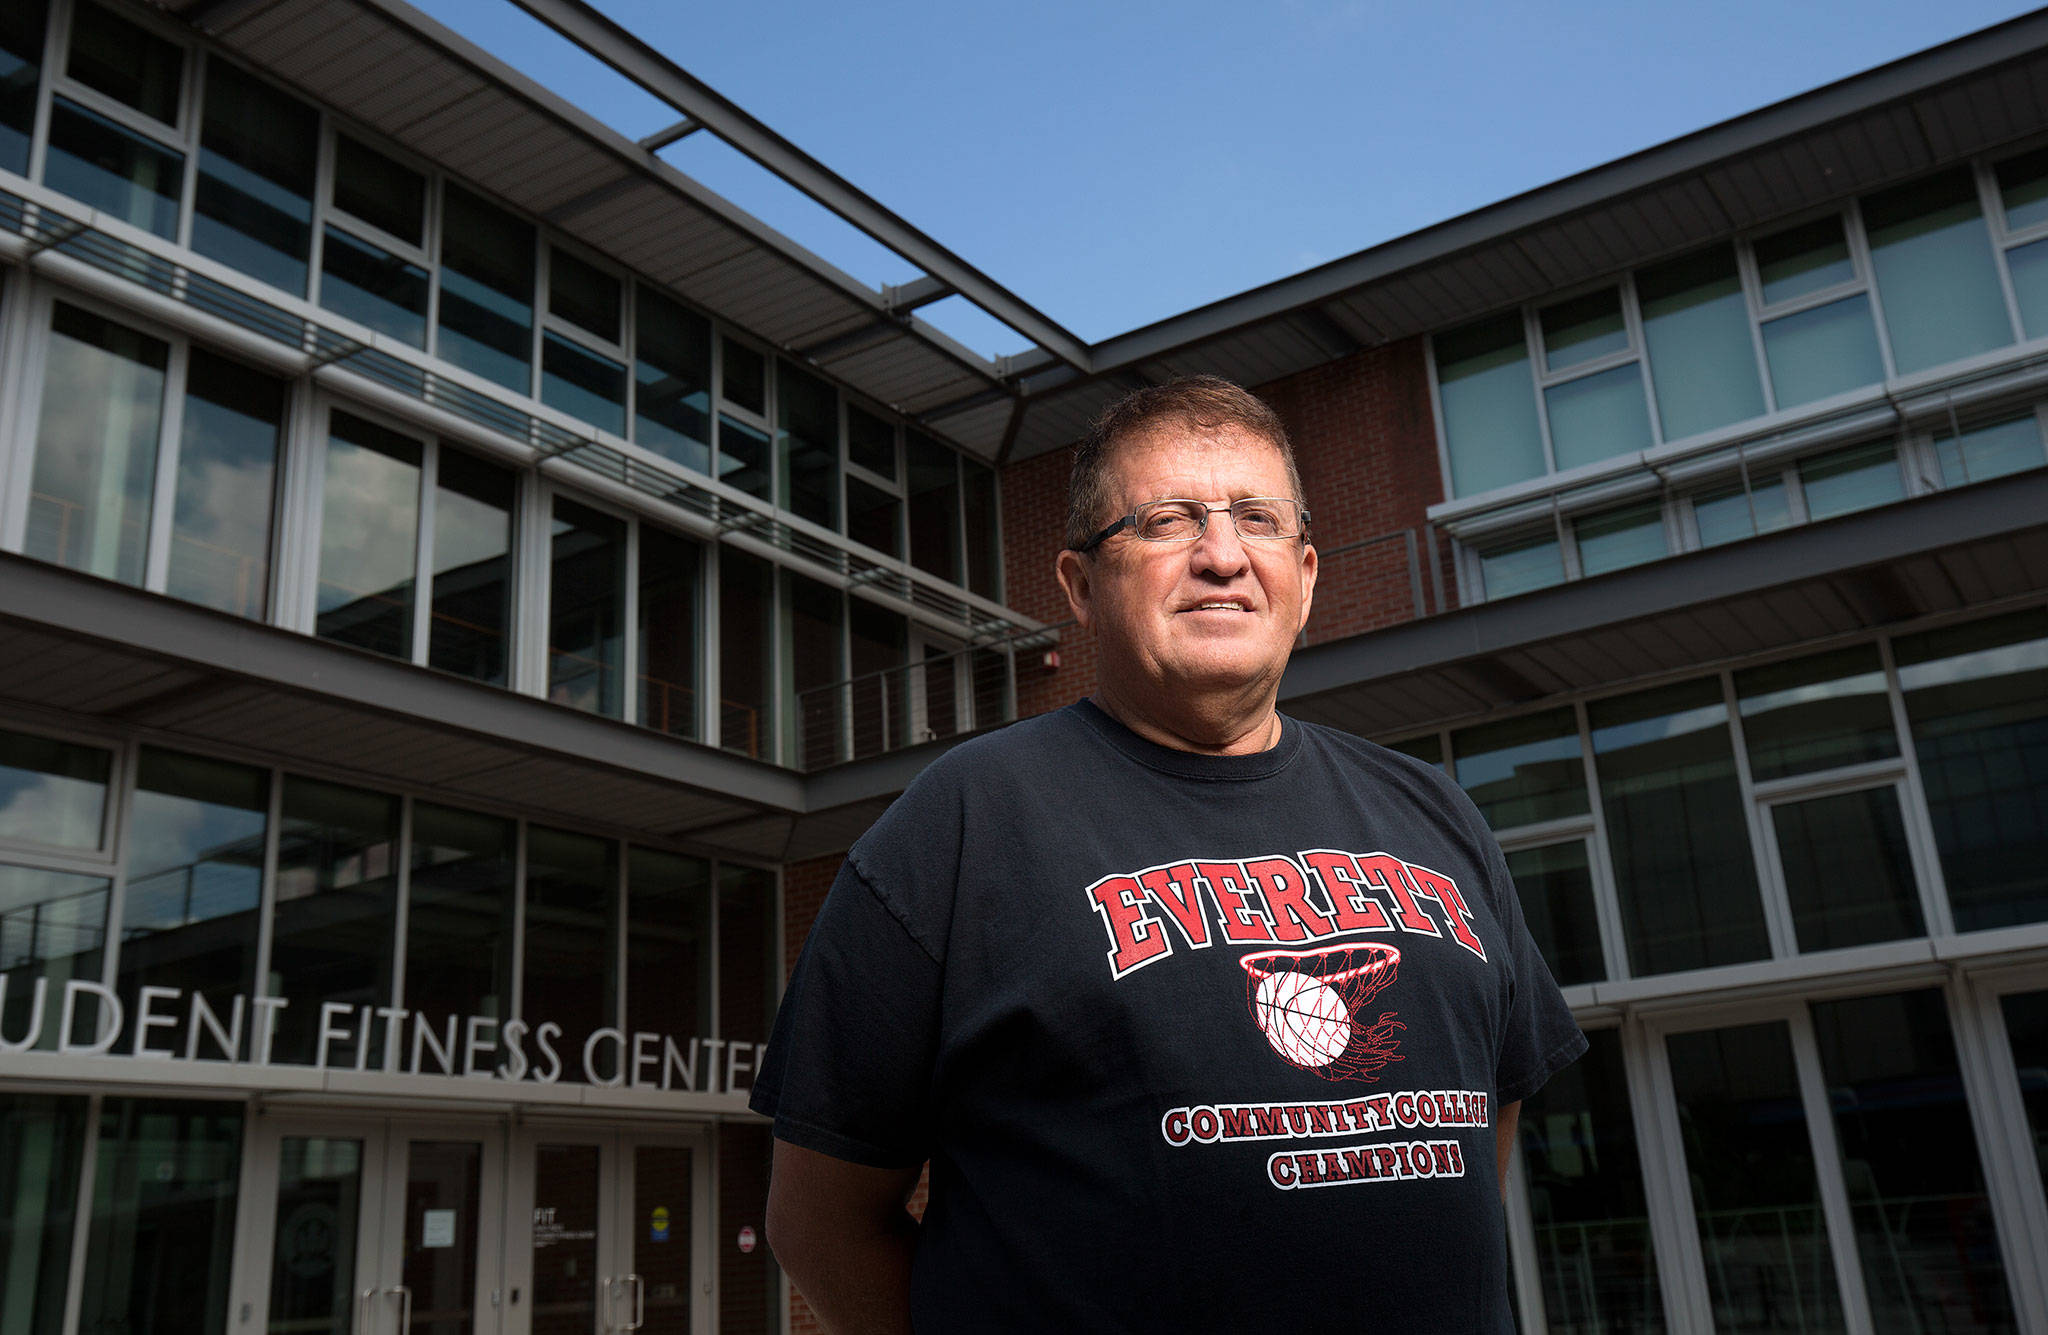 Former Everett Community College men’s basketball coach Larry Walker stands in front of the gym on July 20, 2018, in Everett. Walker is getting inducted into the Washington Interscholastic Basketball Coaches Association’s Hall of Fame on July 24. (Andy Bronson / The Herald)